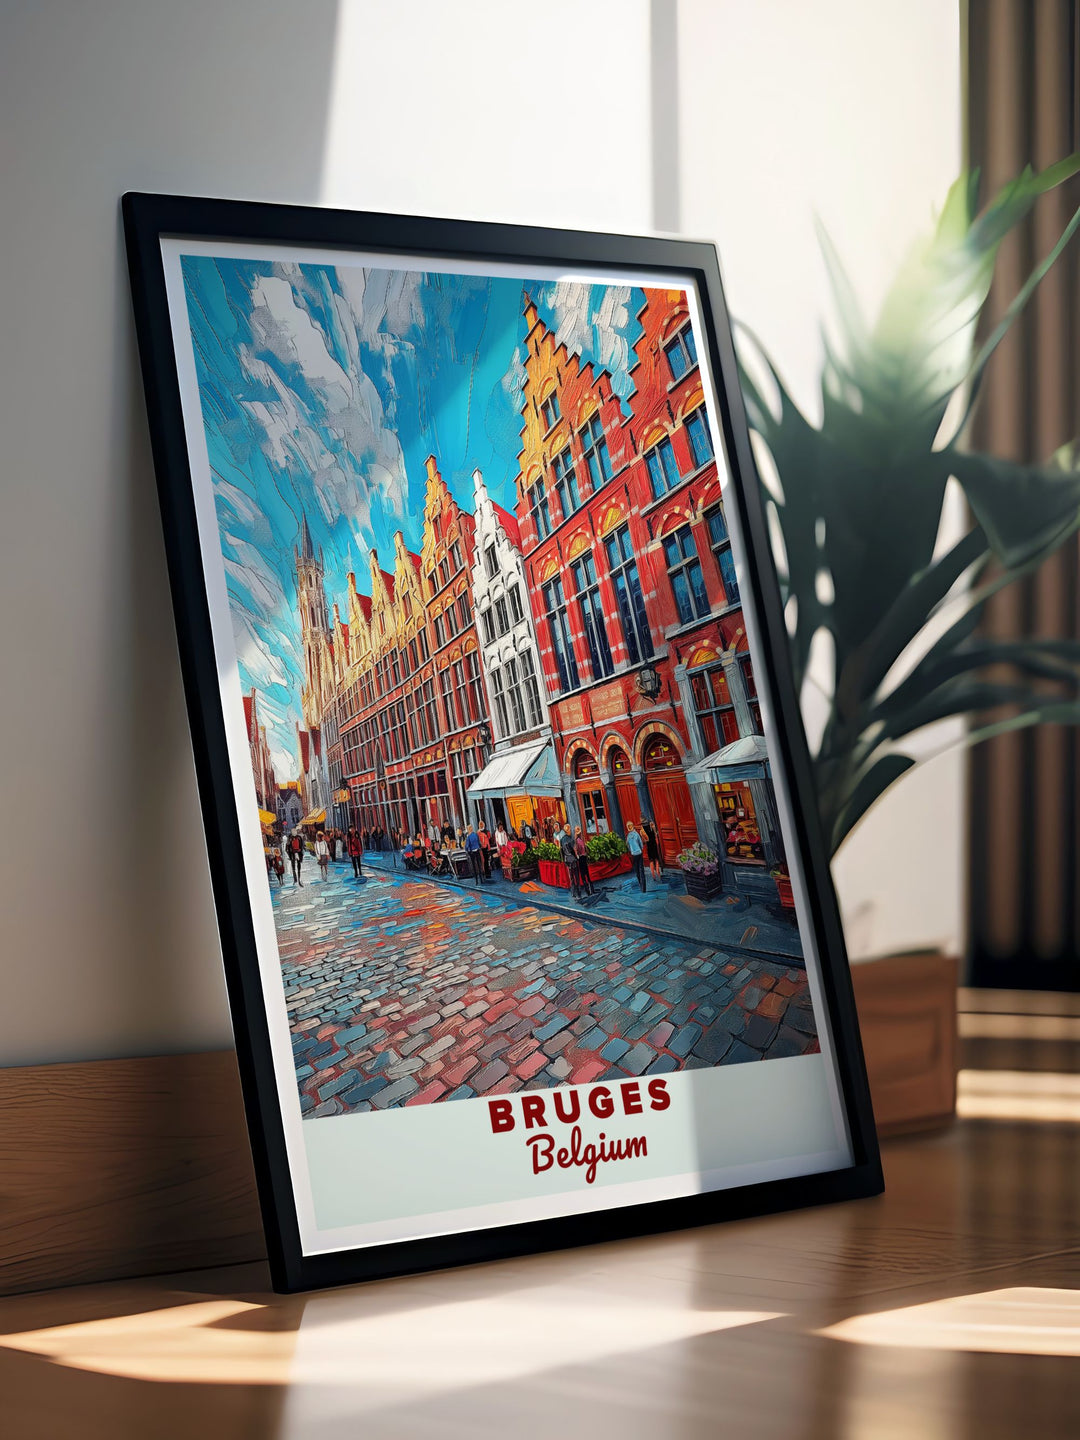 Elegant Grote Markt poster featuring the stunning landmark in Bruges, Belgium. This detailed artwork captures the beauty and history of the Grote Markt, making it a unique and sophisticated addition to any living space.